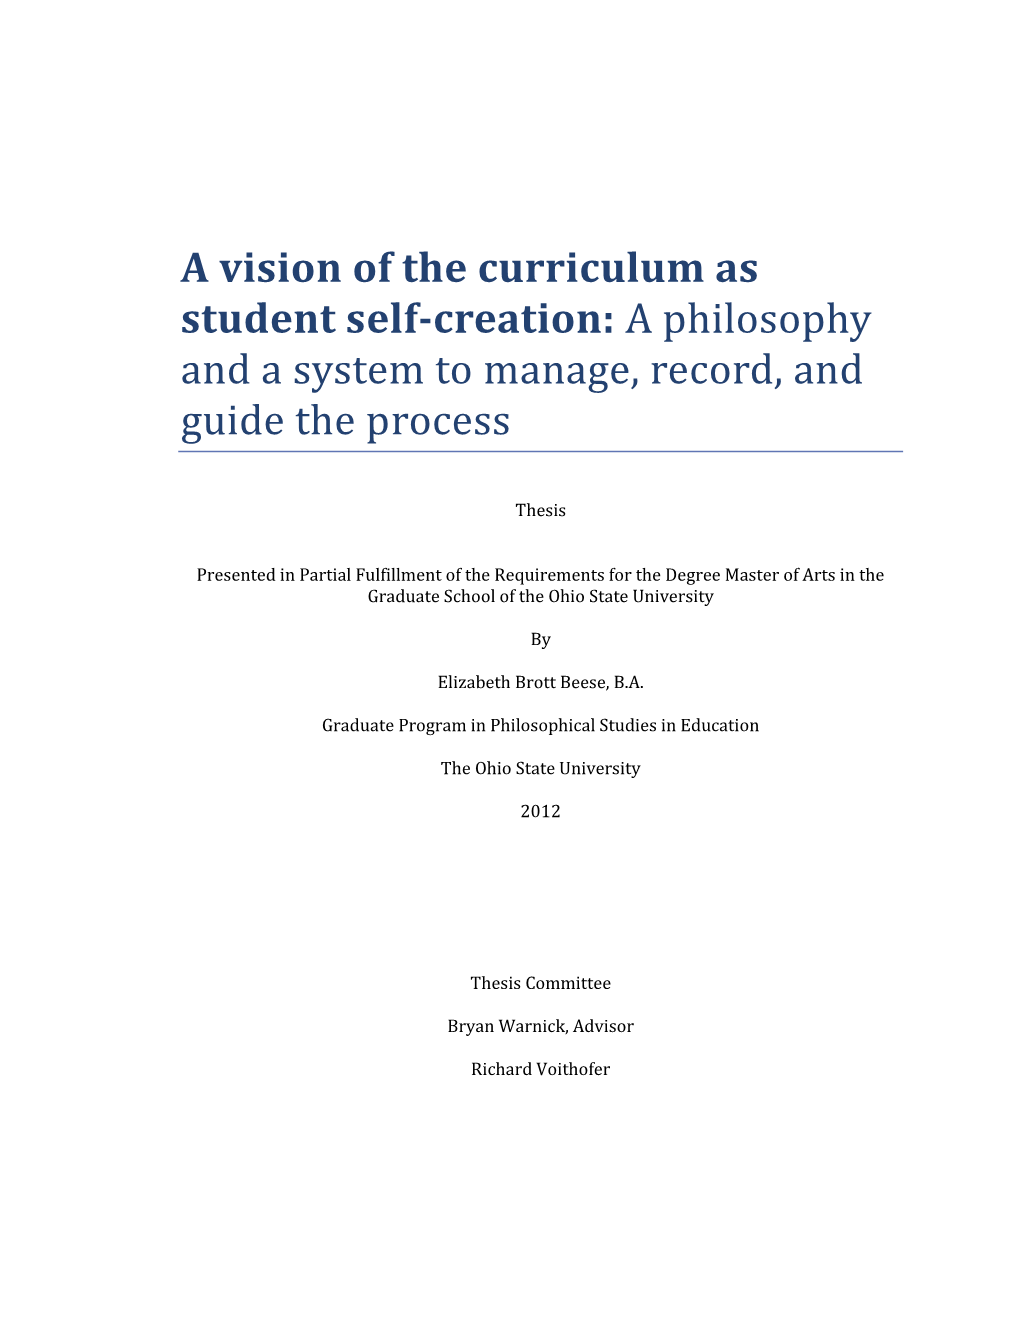 A Vision of the Curriculum As Student Self-Creation: a Philosophy and a System to Manage, Record, and Guide the Process